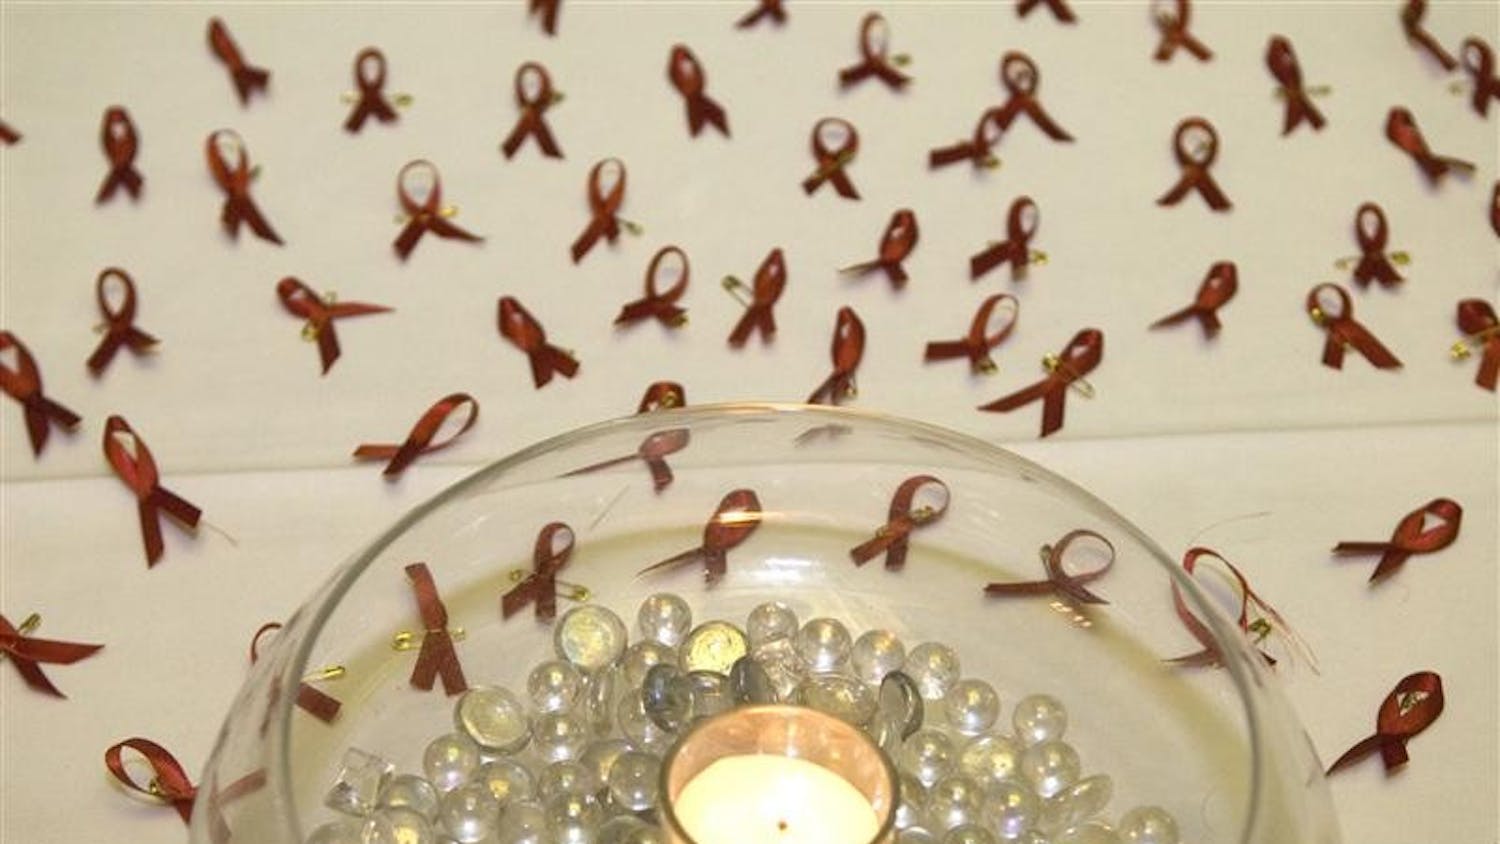 Red ribbons signifying AIDS awareness sit on a table Monday outside the Ballroom at Fountain Square Mall. The ribbons were available for those attending an event recognizing World AIDS Day.